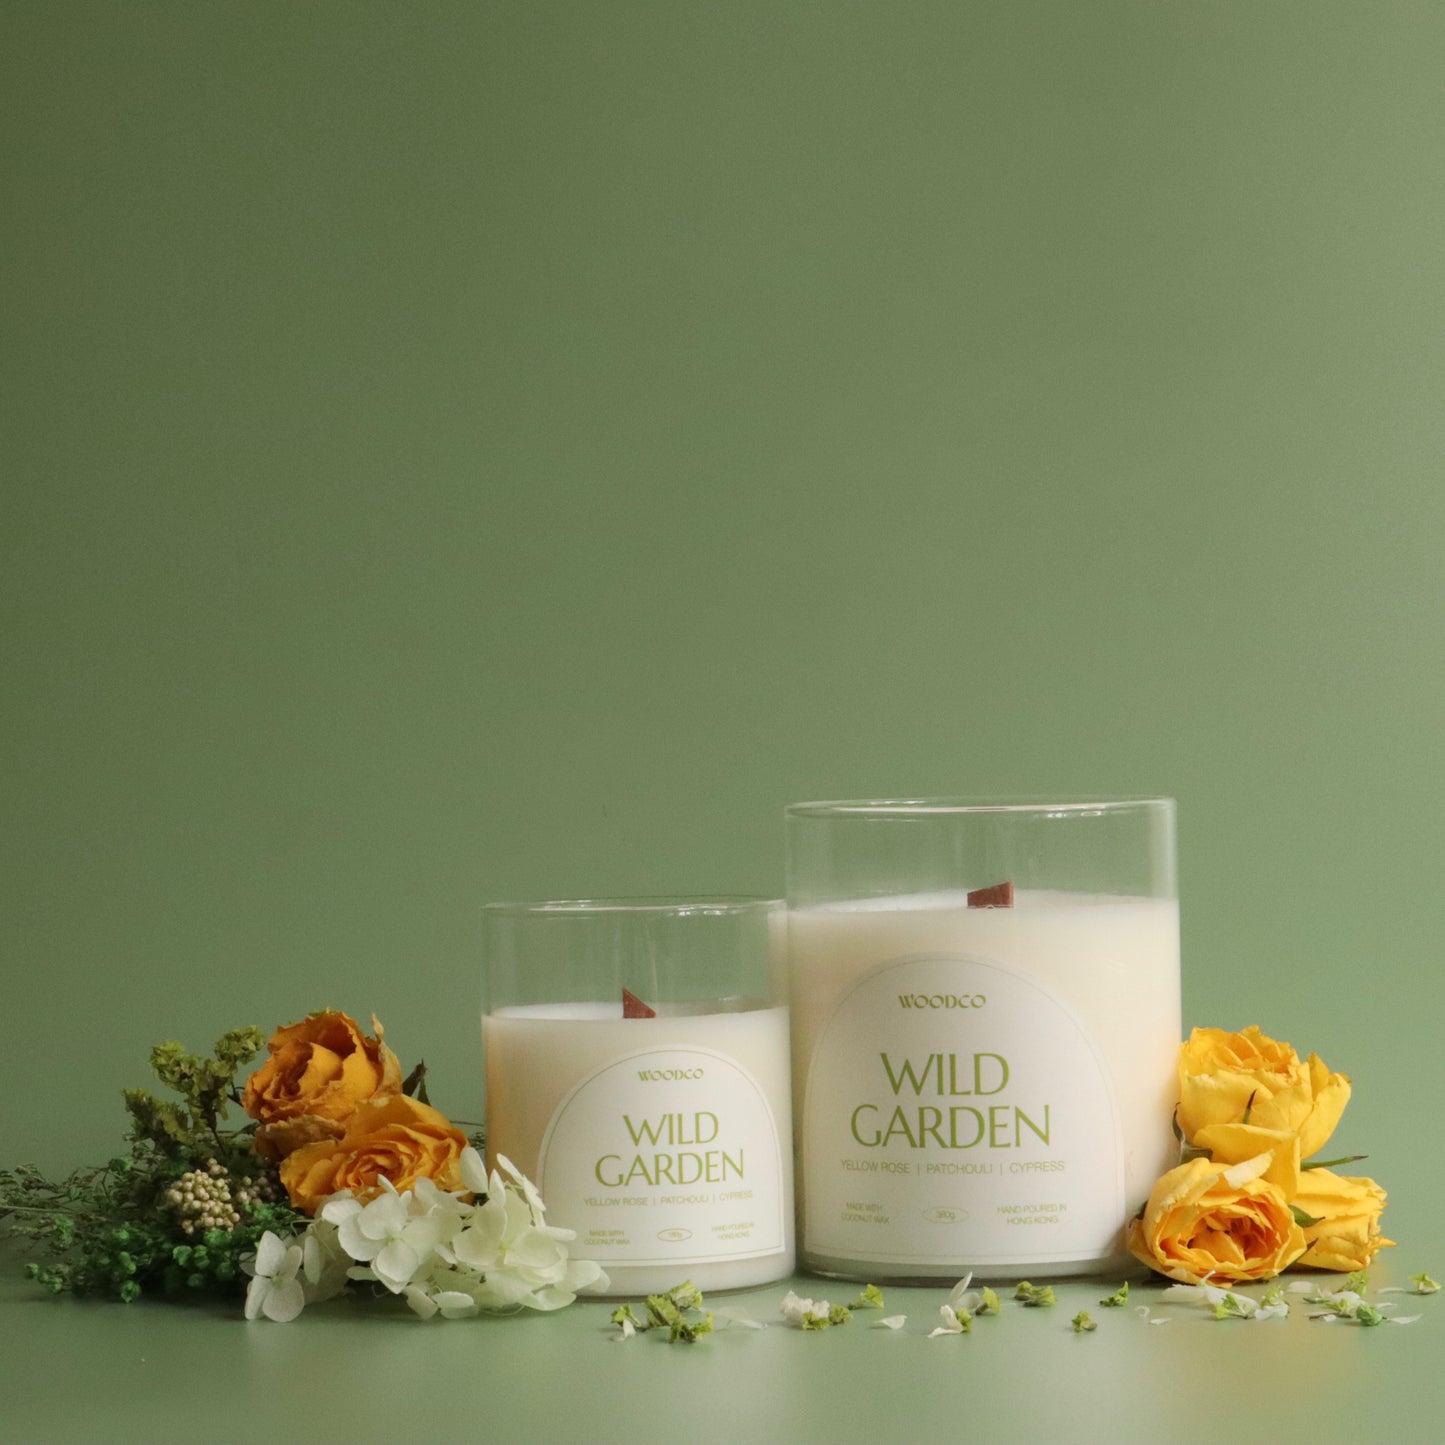 Wild Garden scented candle